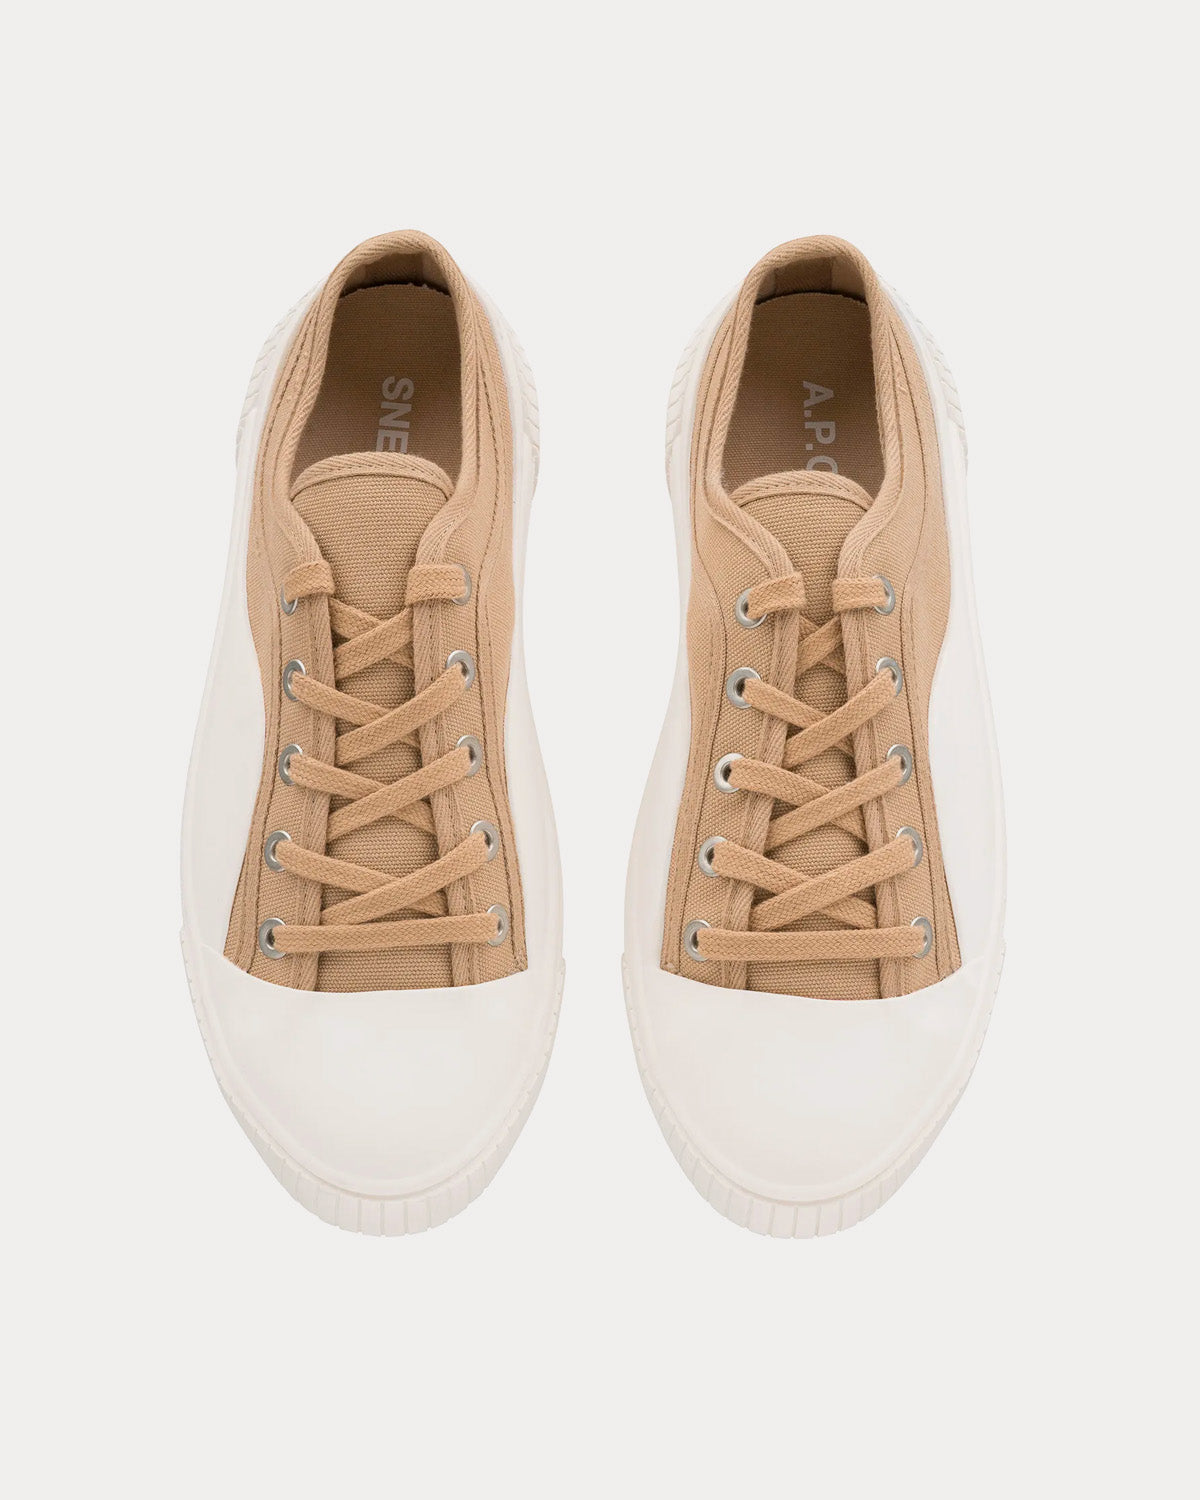 A.P.C. - Iggy Basse Camel Low Top Sneakers